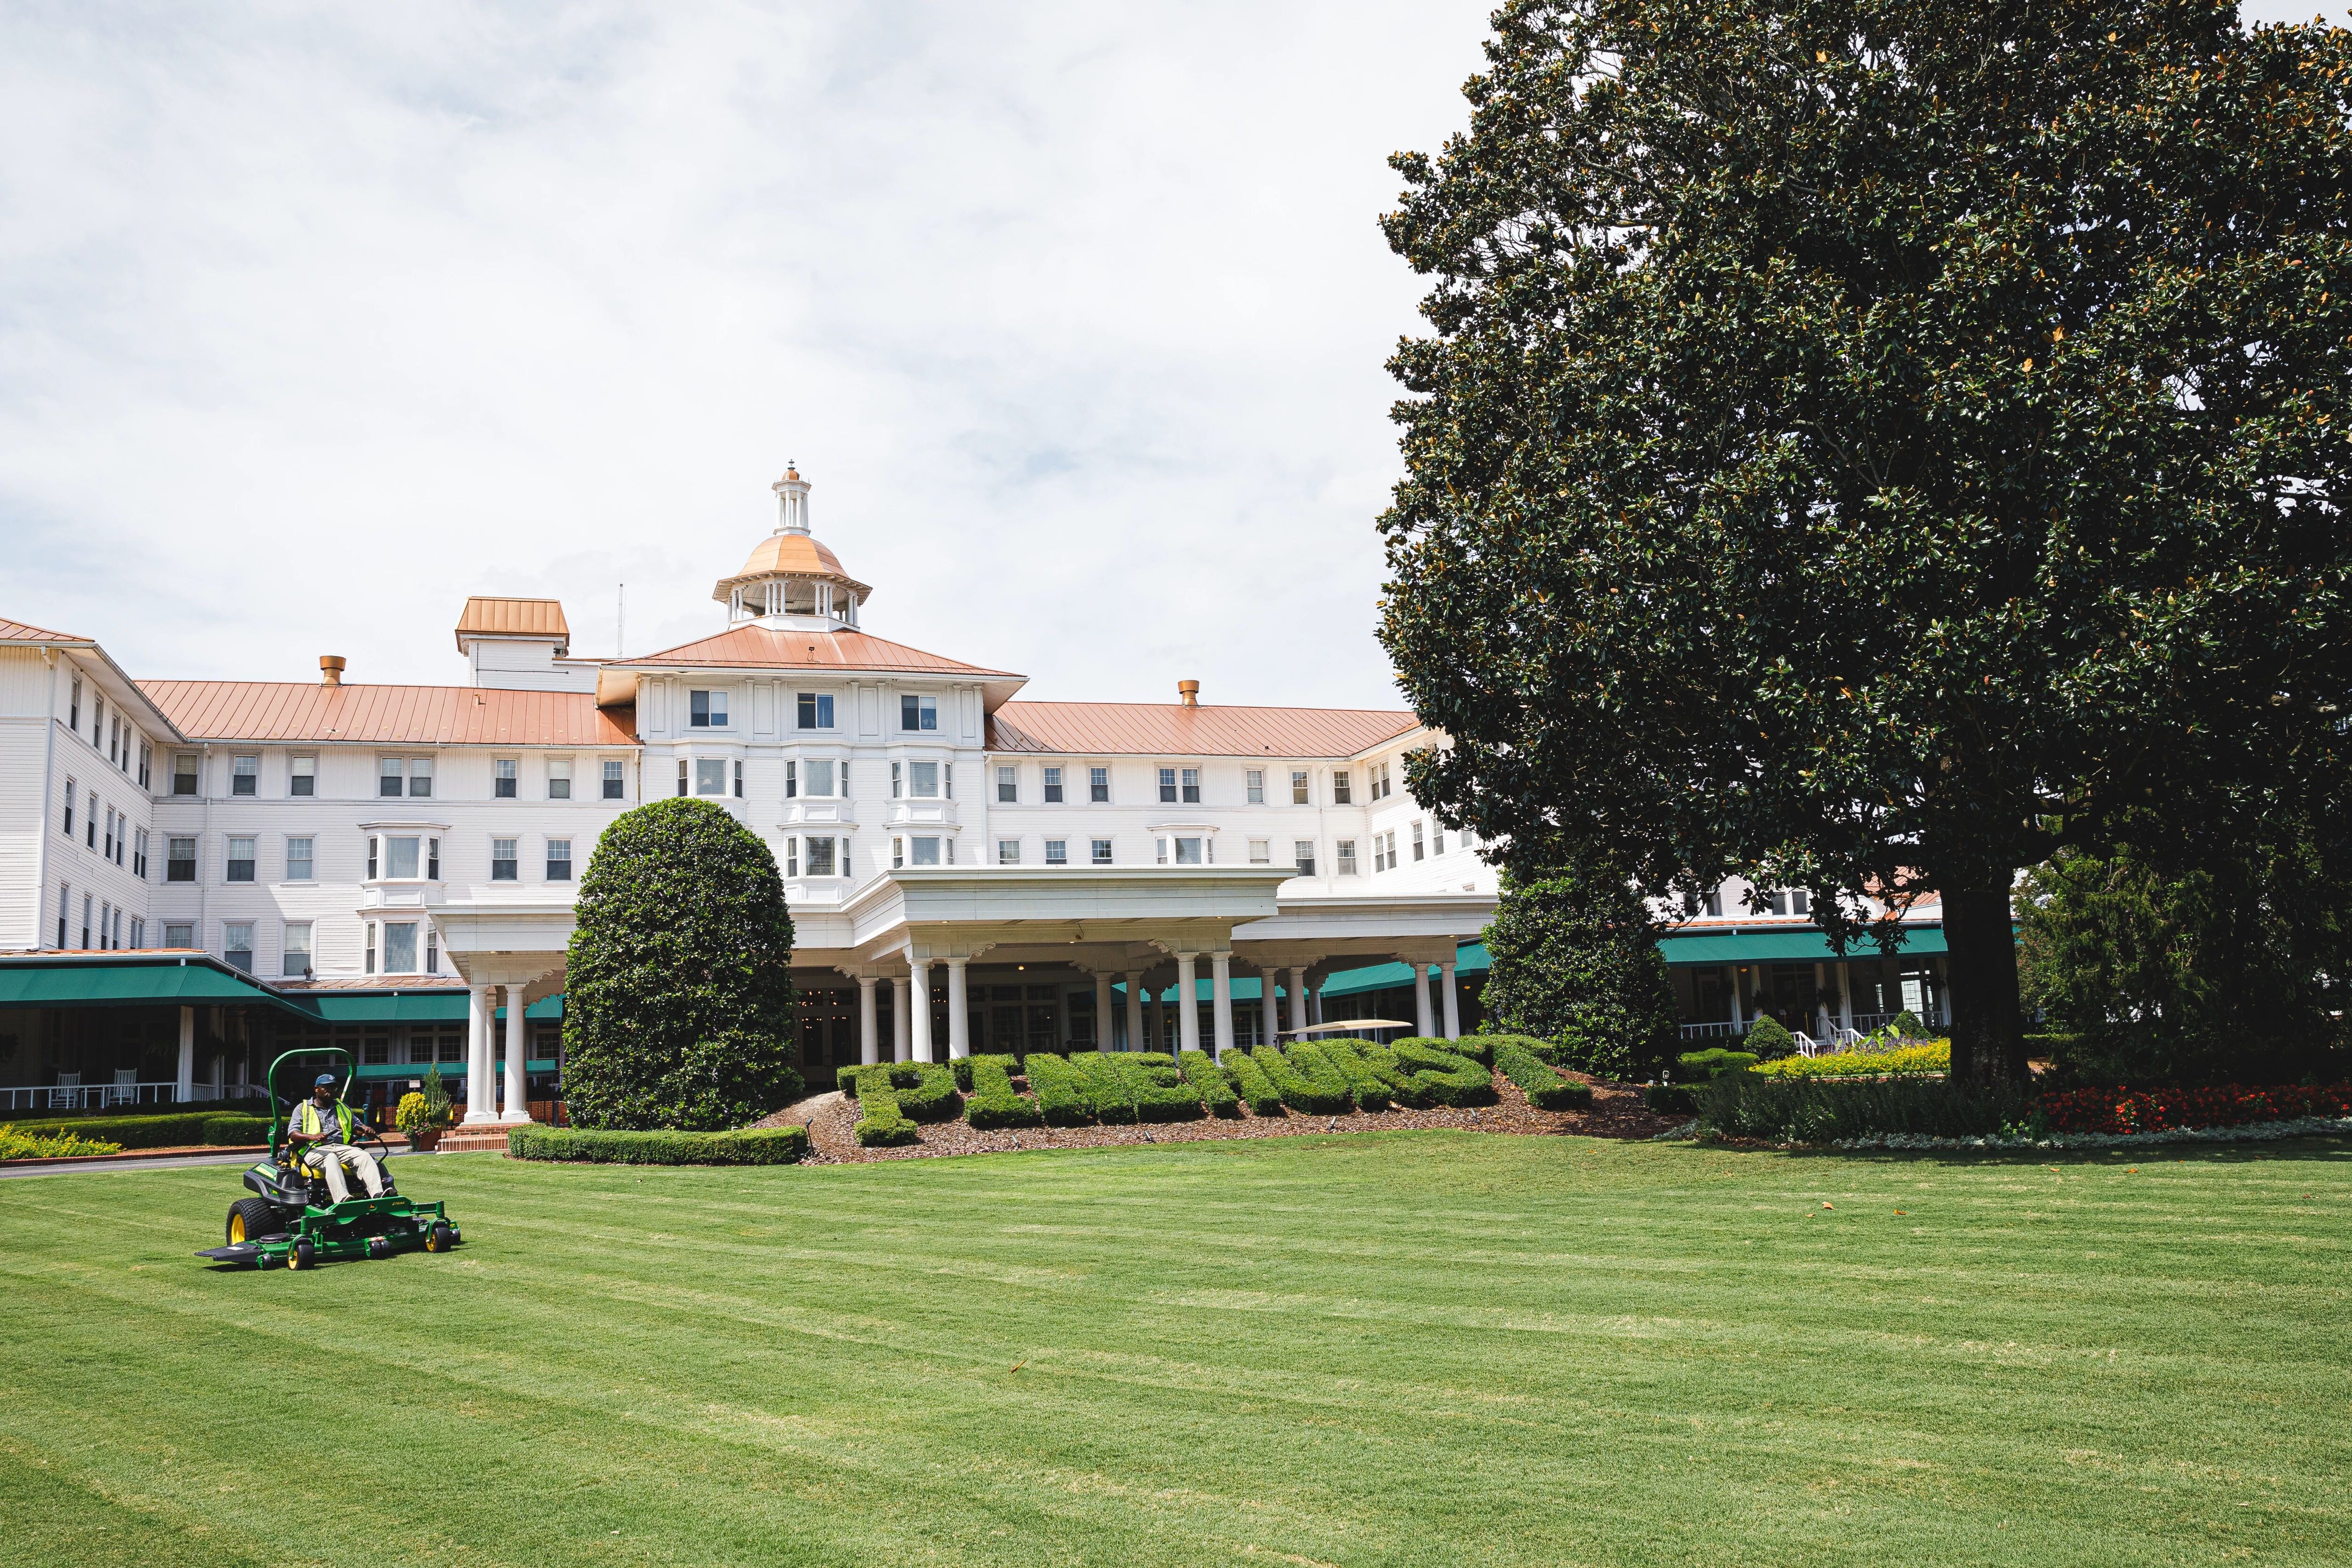 Pinehurst Resort, North Carolina, September 2021, grounds maintenance personnel mowing the lawn in front of the resort clubhouse